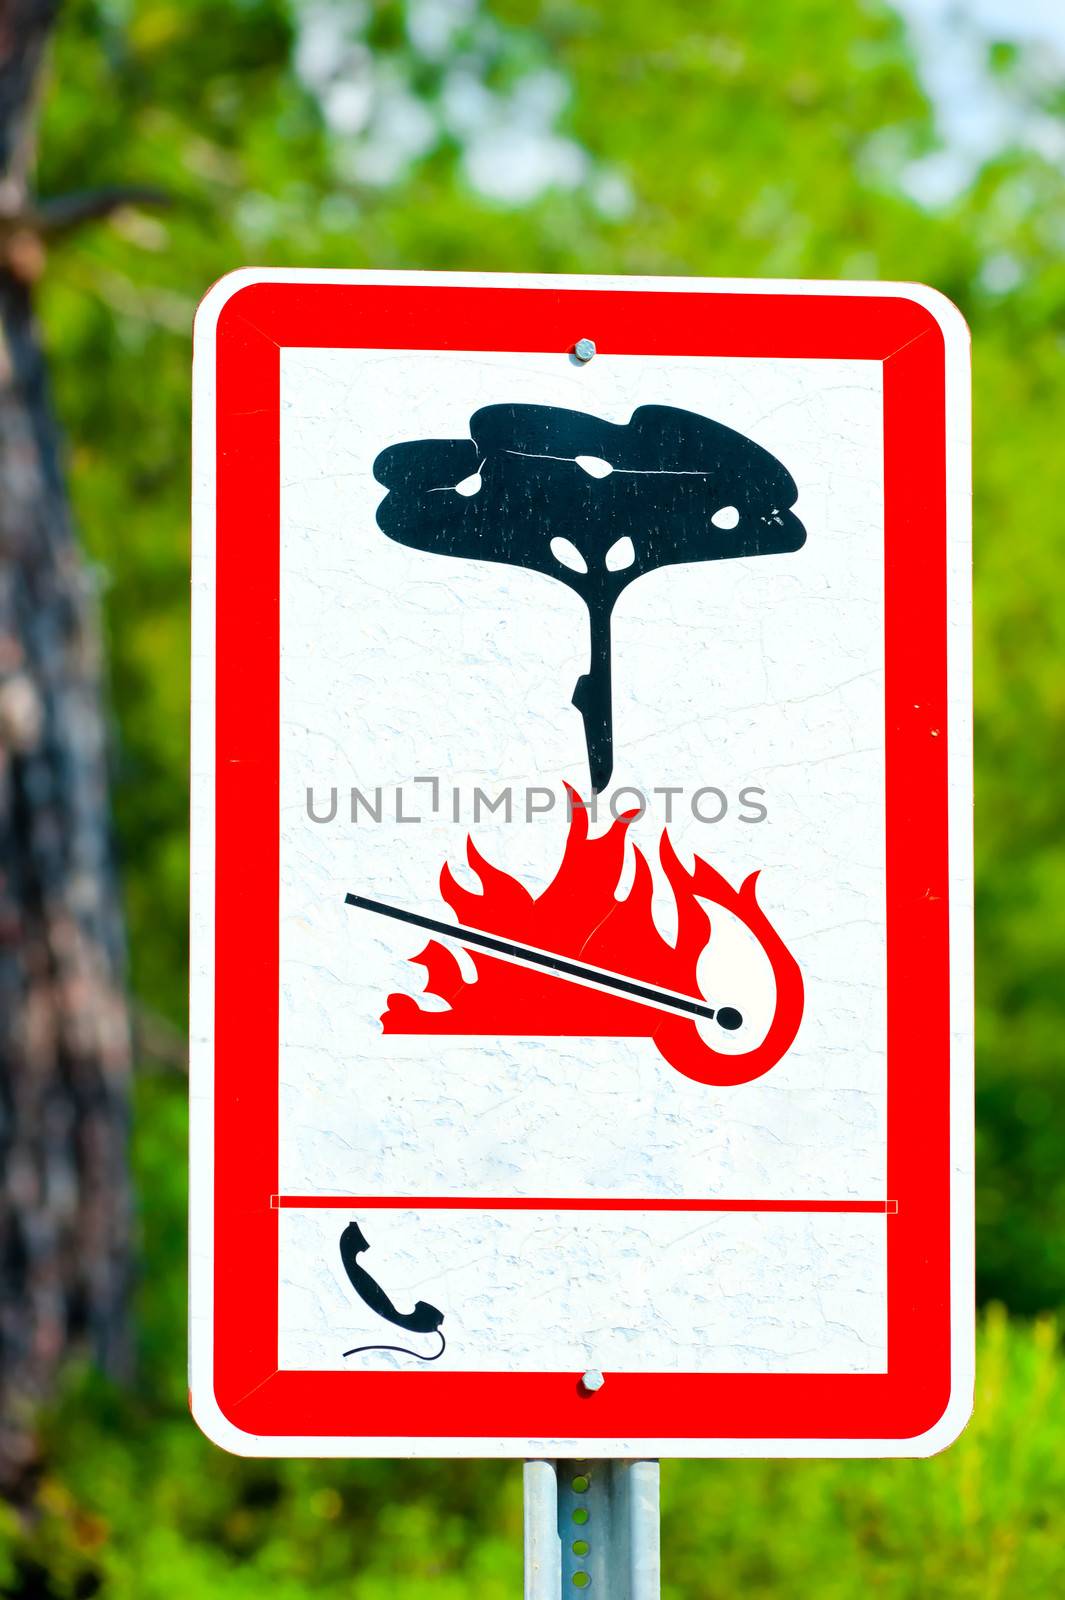 information sign in the woods on fire risk by kosmsos111